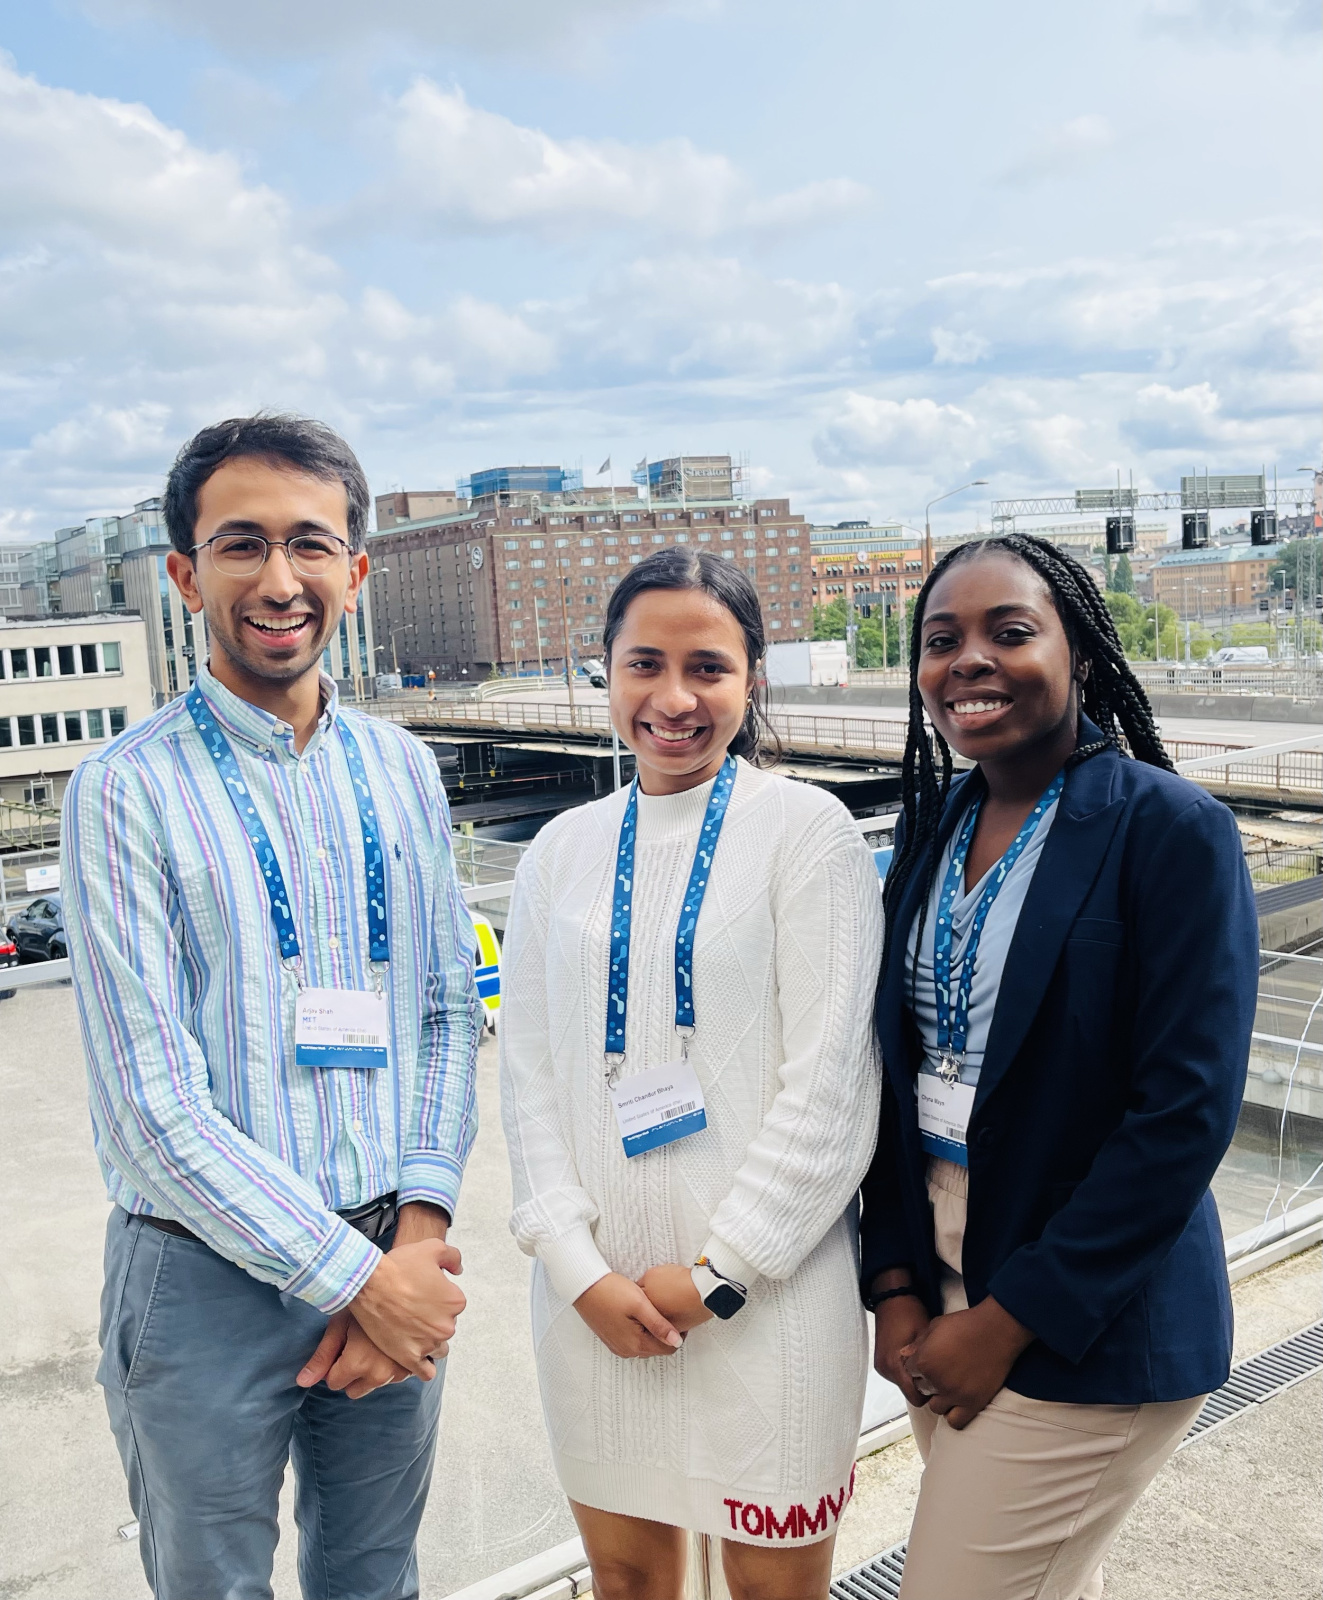 From left to right: Arjav Shah, Smriti Bhaya, and Chyna Mays standing in front of Stockholm buildings